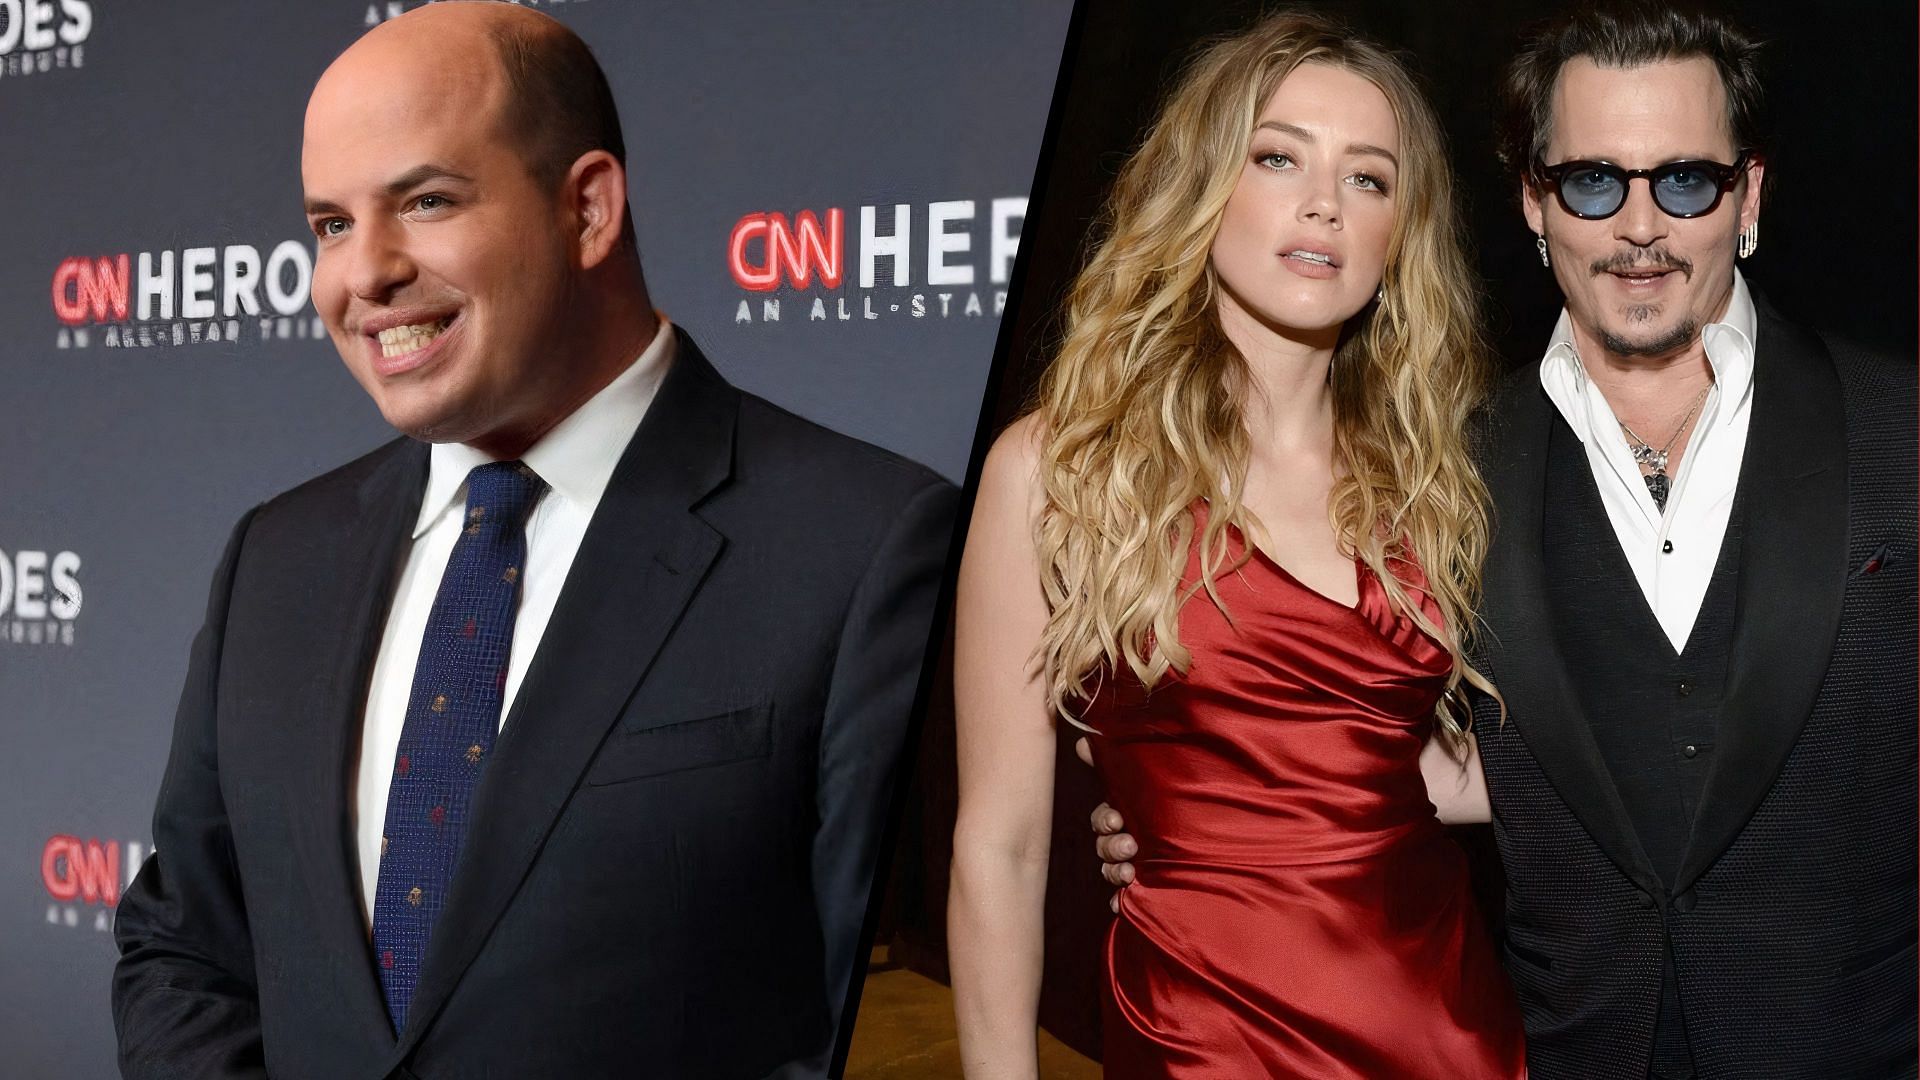 Stelter, Heard, and Depp (Image via Kevin Mazur/Getty Images and Michael Kovac/Getty Images)